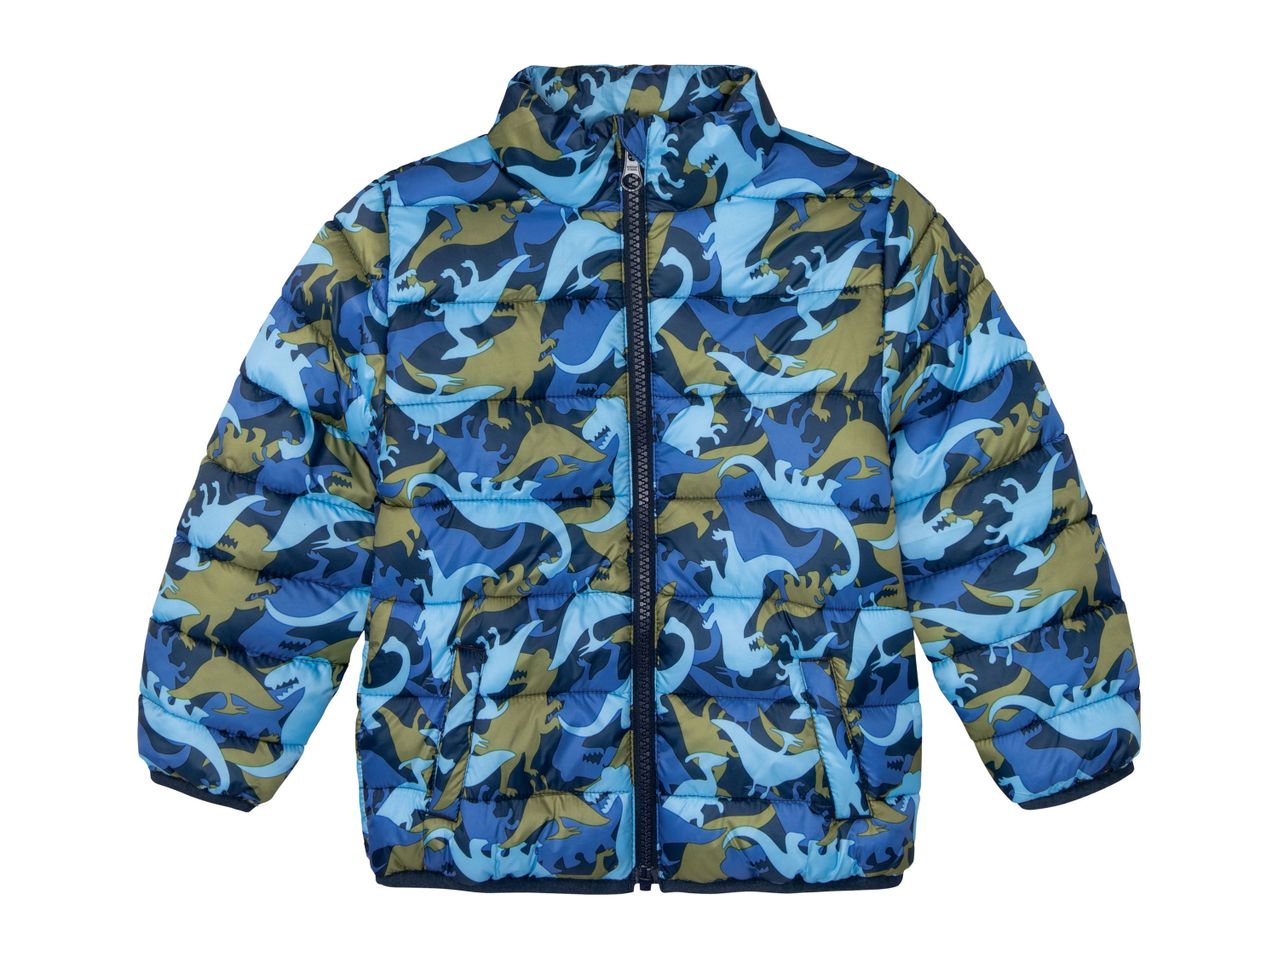 Go to full screen view: Boy’s Lightweight Jacket - Image 1